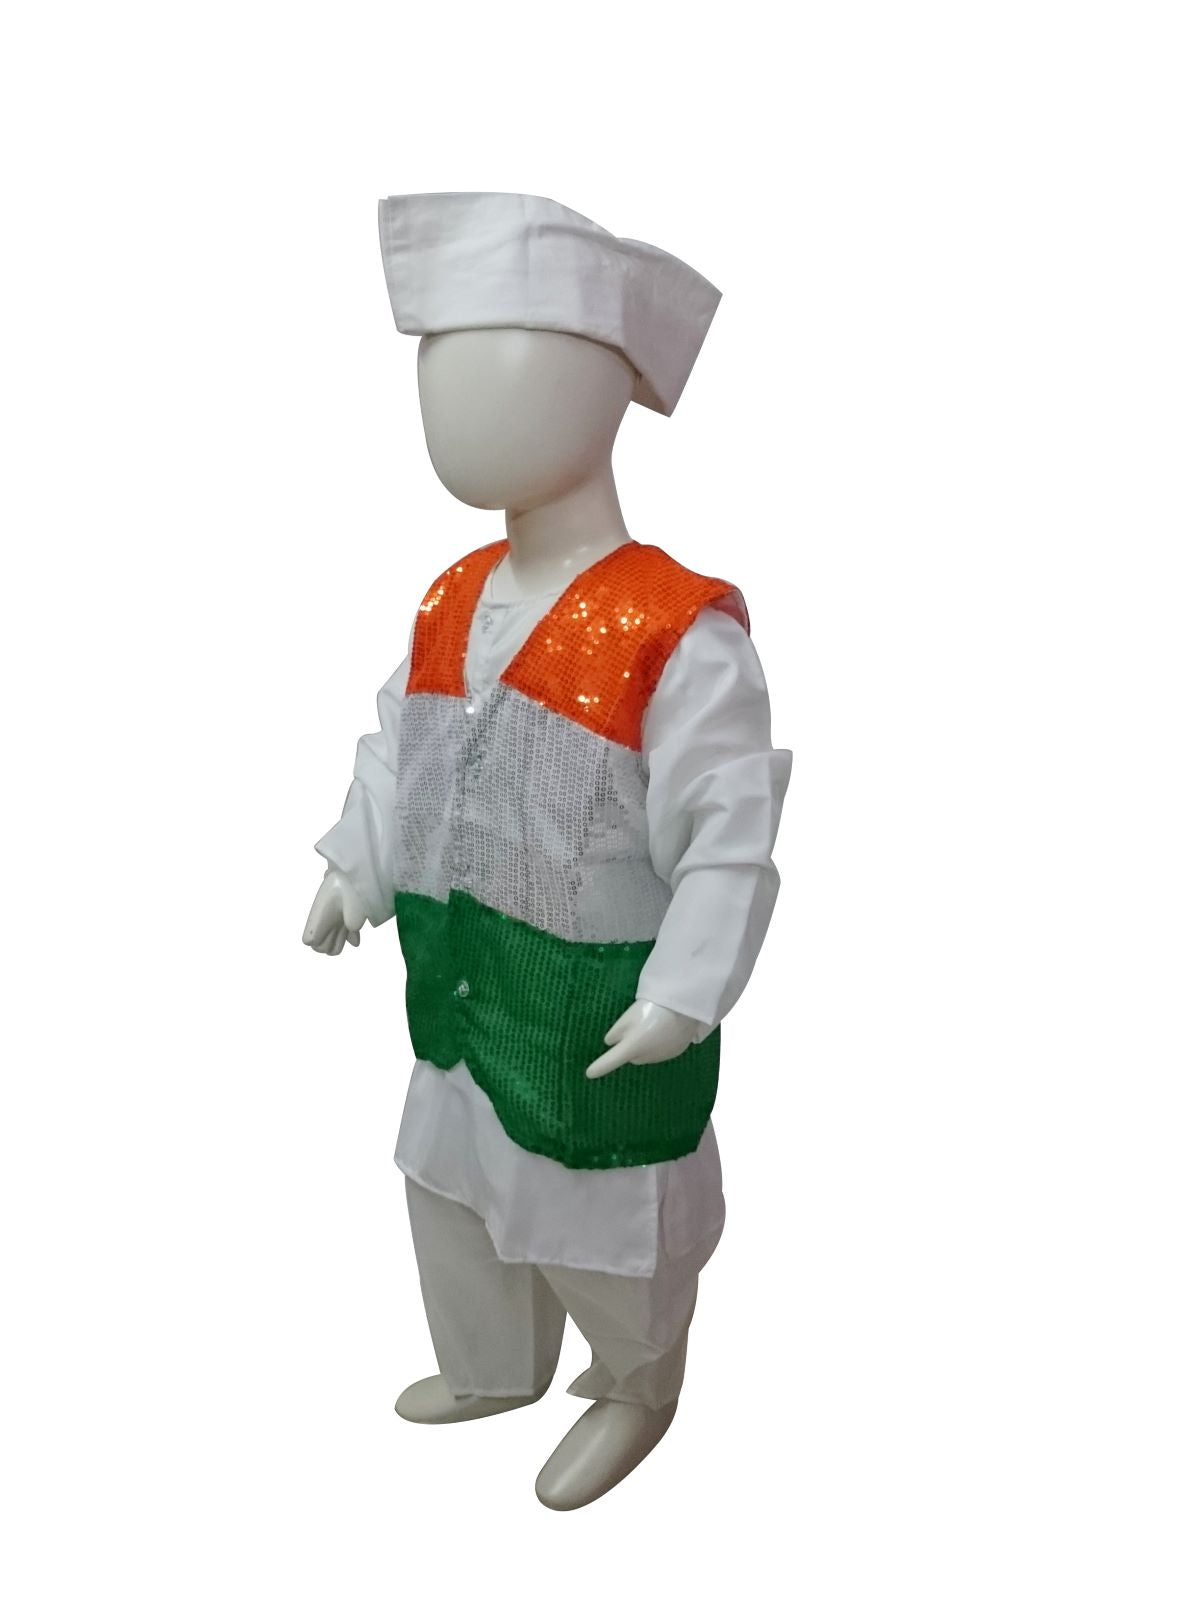 Buy SBD Unisex Jawaharlal Nehru Dress for 3-4 years Independence  Day/Republic Day/Annual function/Theme Party/Competition/Stage Shows Dress  Online at Low Prices in India - Amazon.in